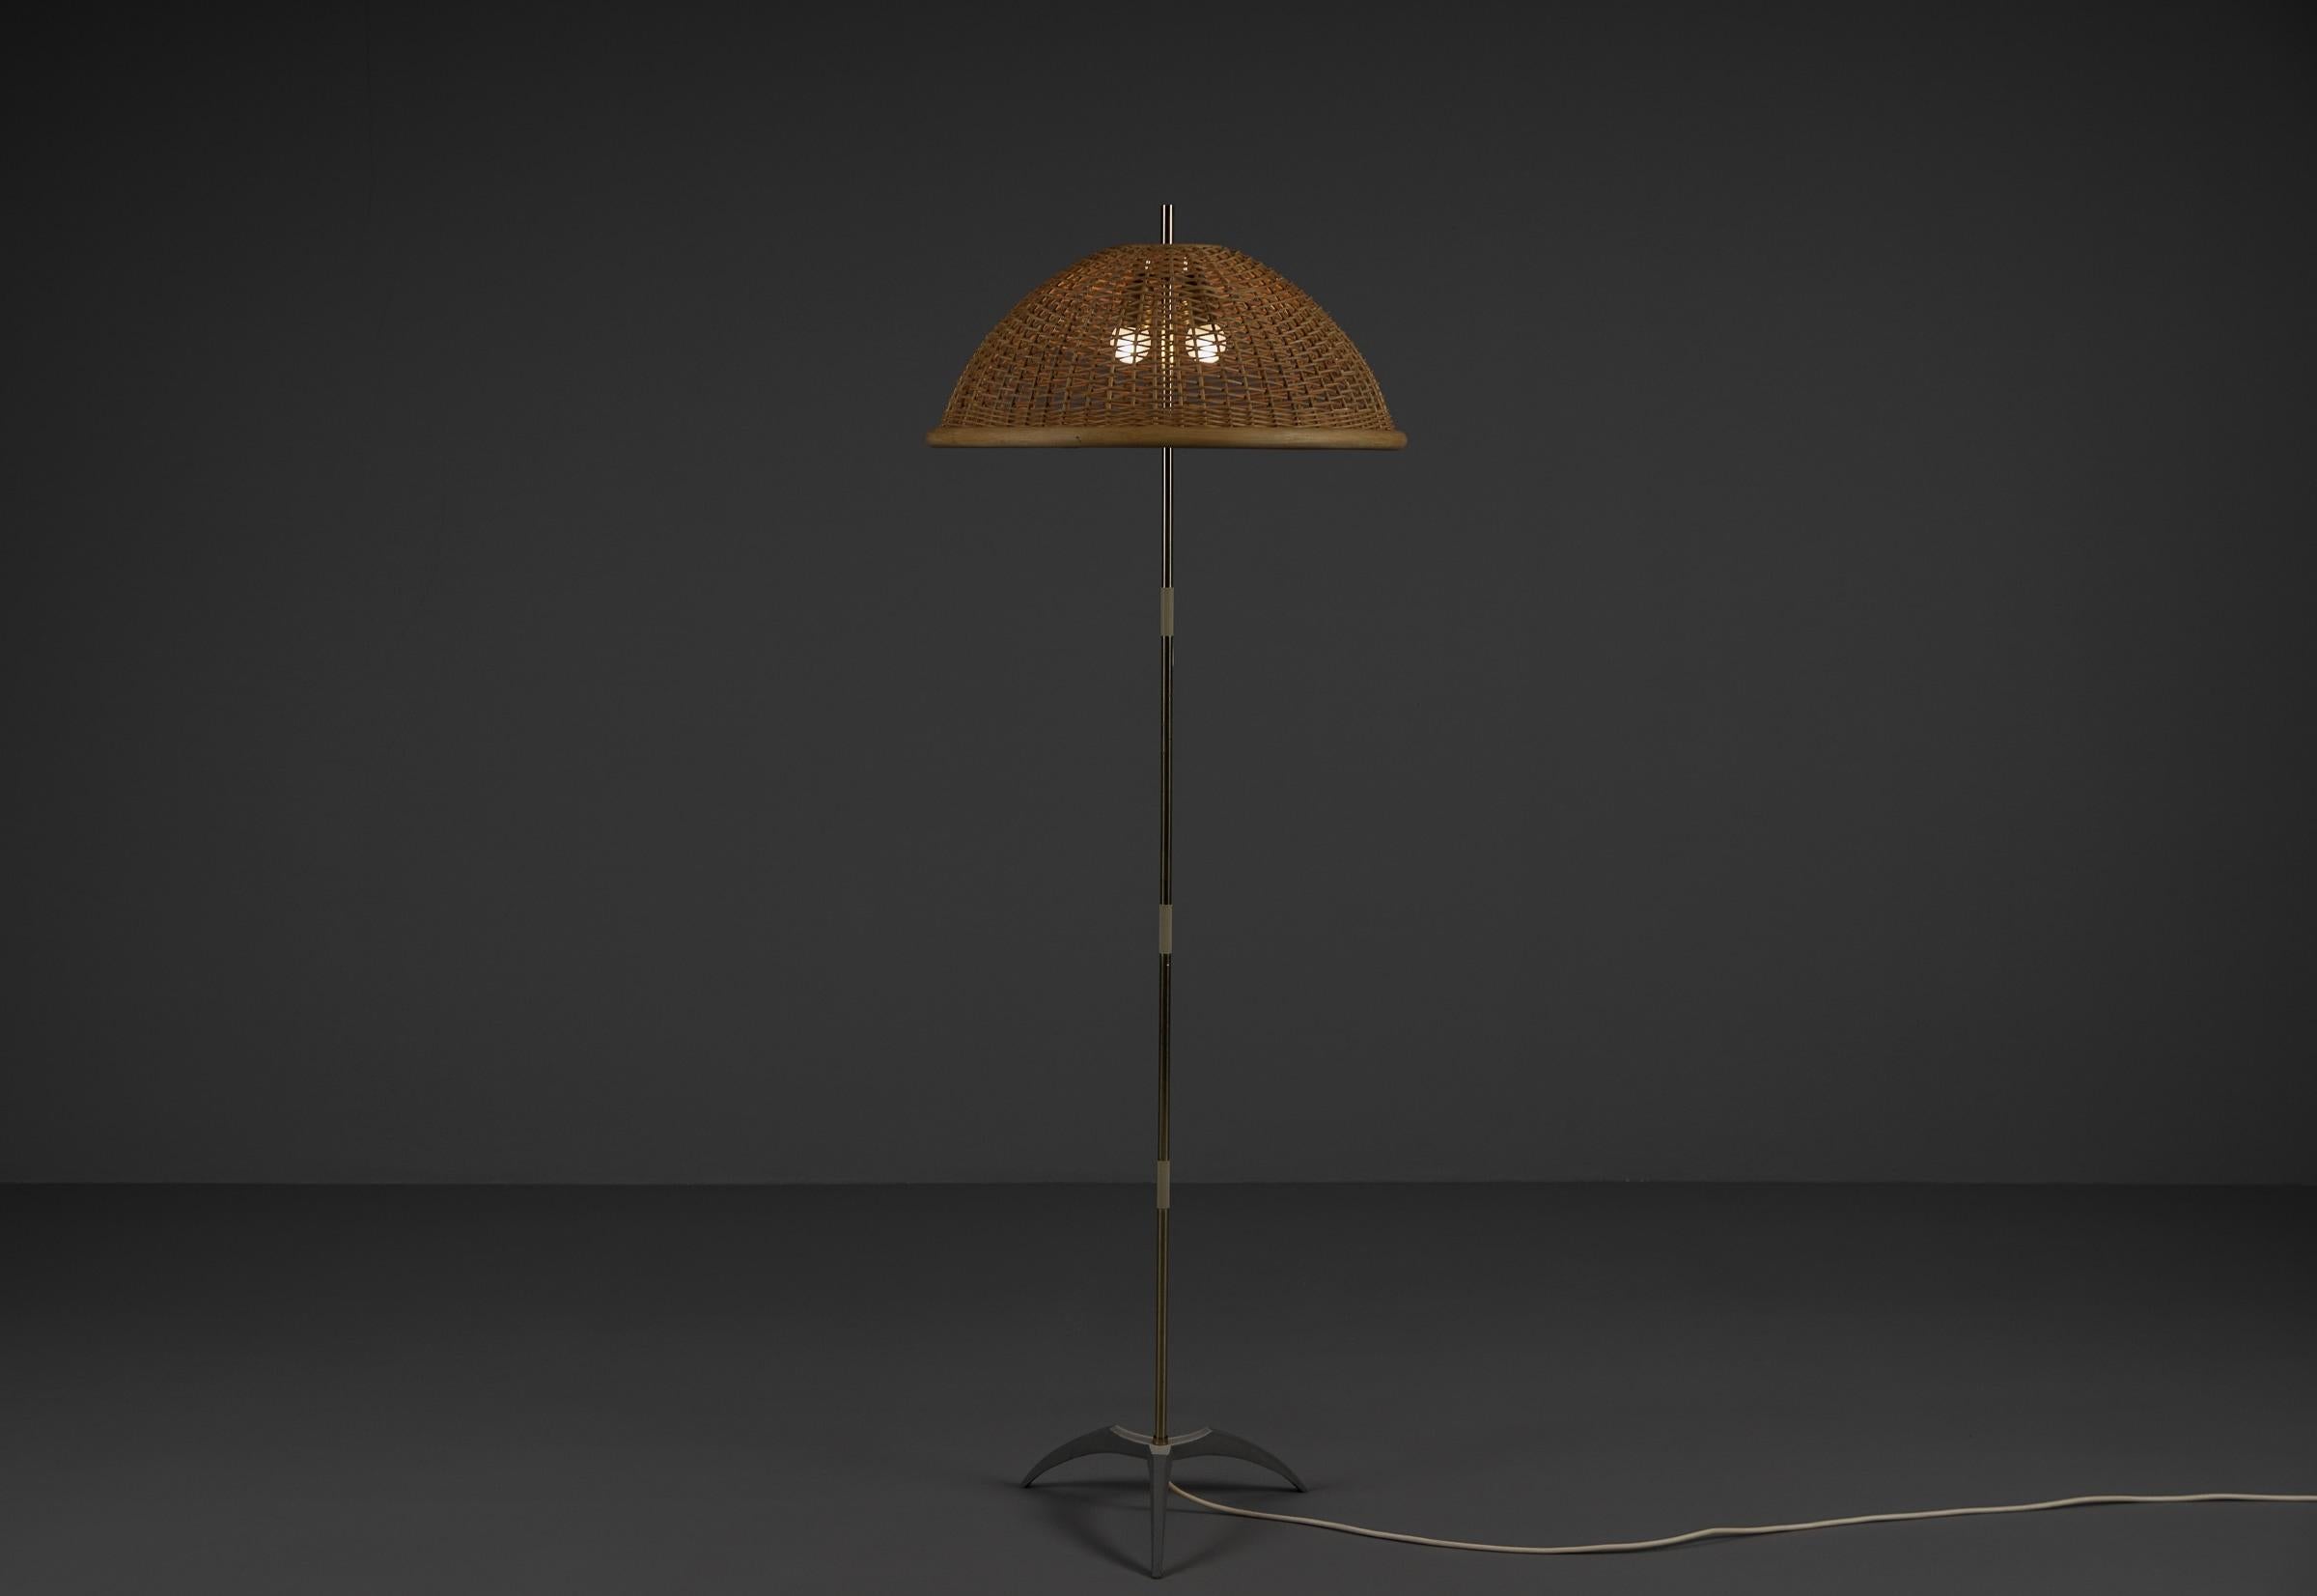 Mid-20th Century Tripod Floor Lamp with Rattan Shade, 1950s Italy For Sale